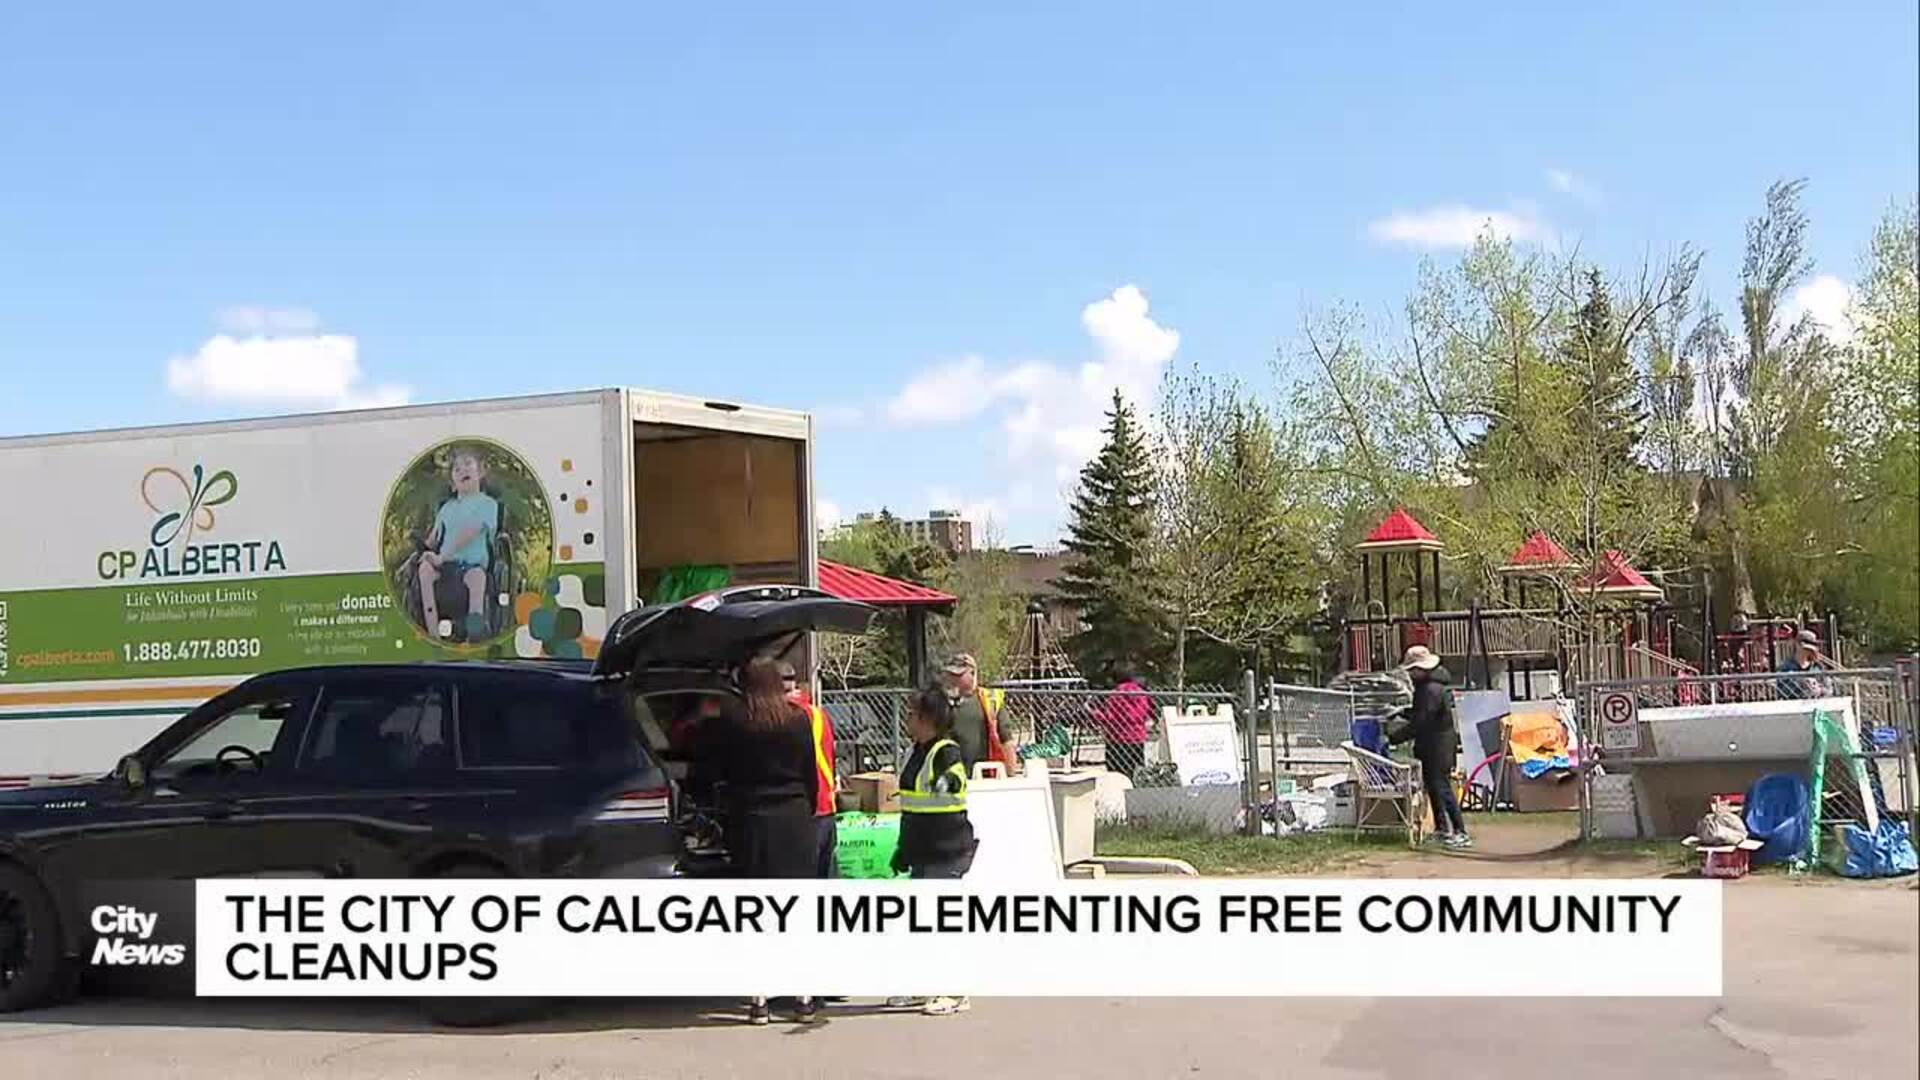 The City of Calgary implementing free community cleanups